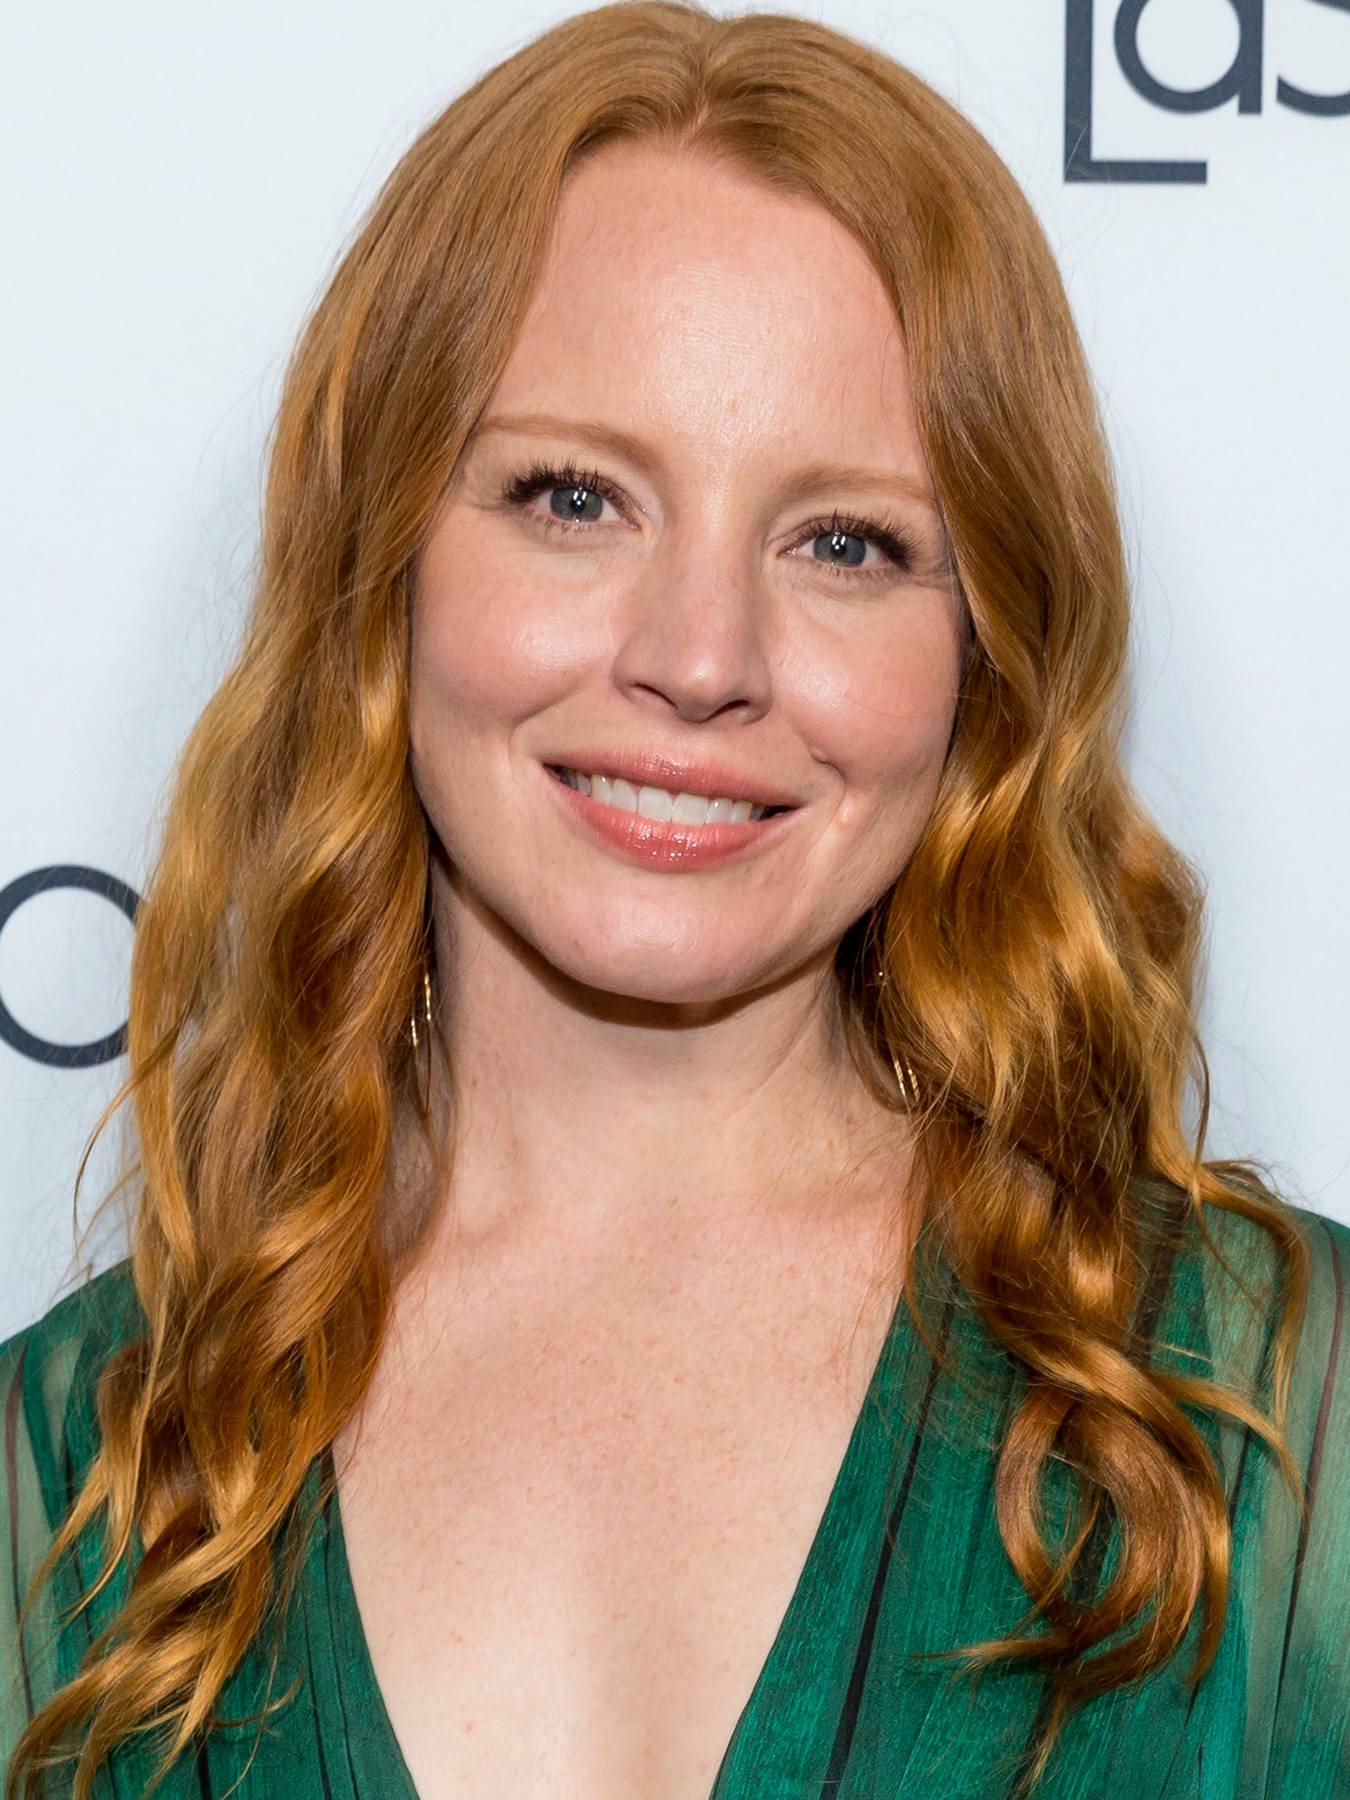 Lauren Ambrose At The Premiere Of "The Last Tycoon" Wallpaper